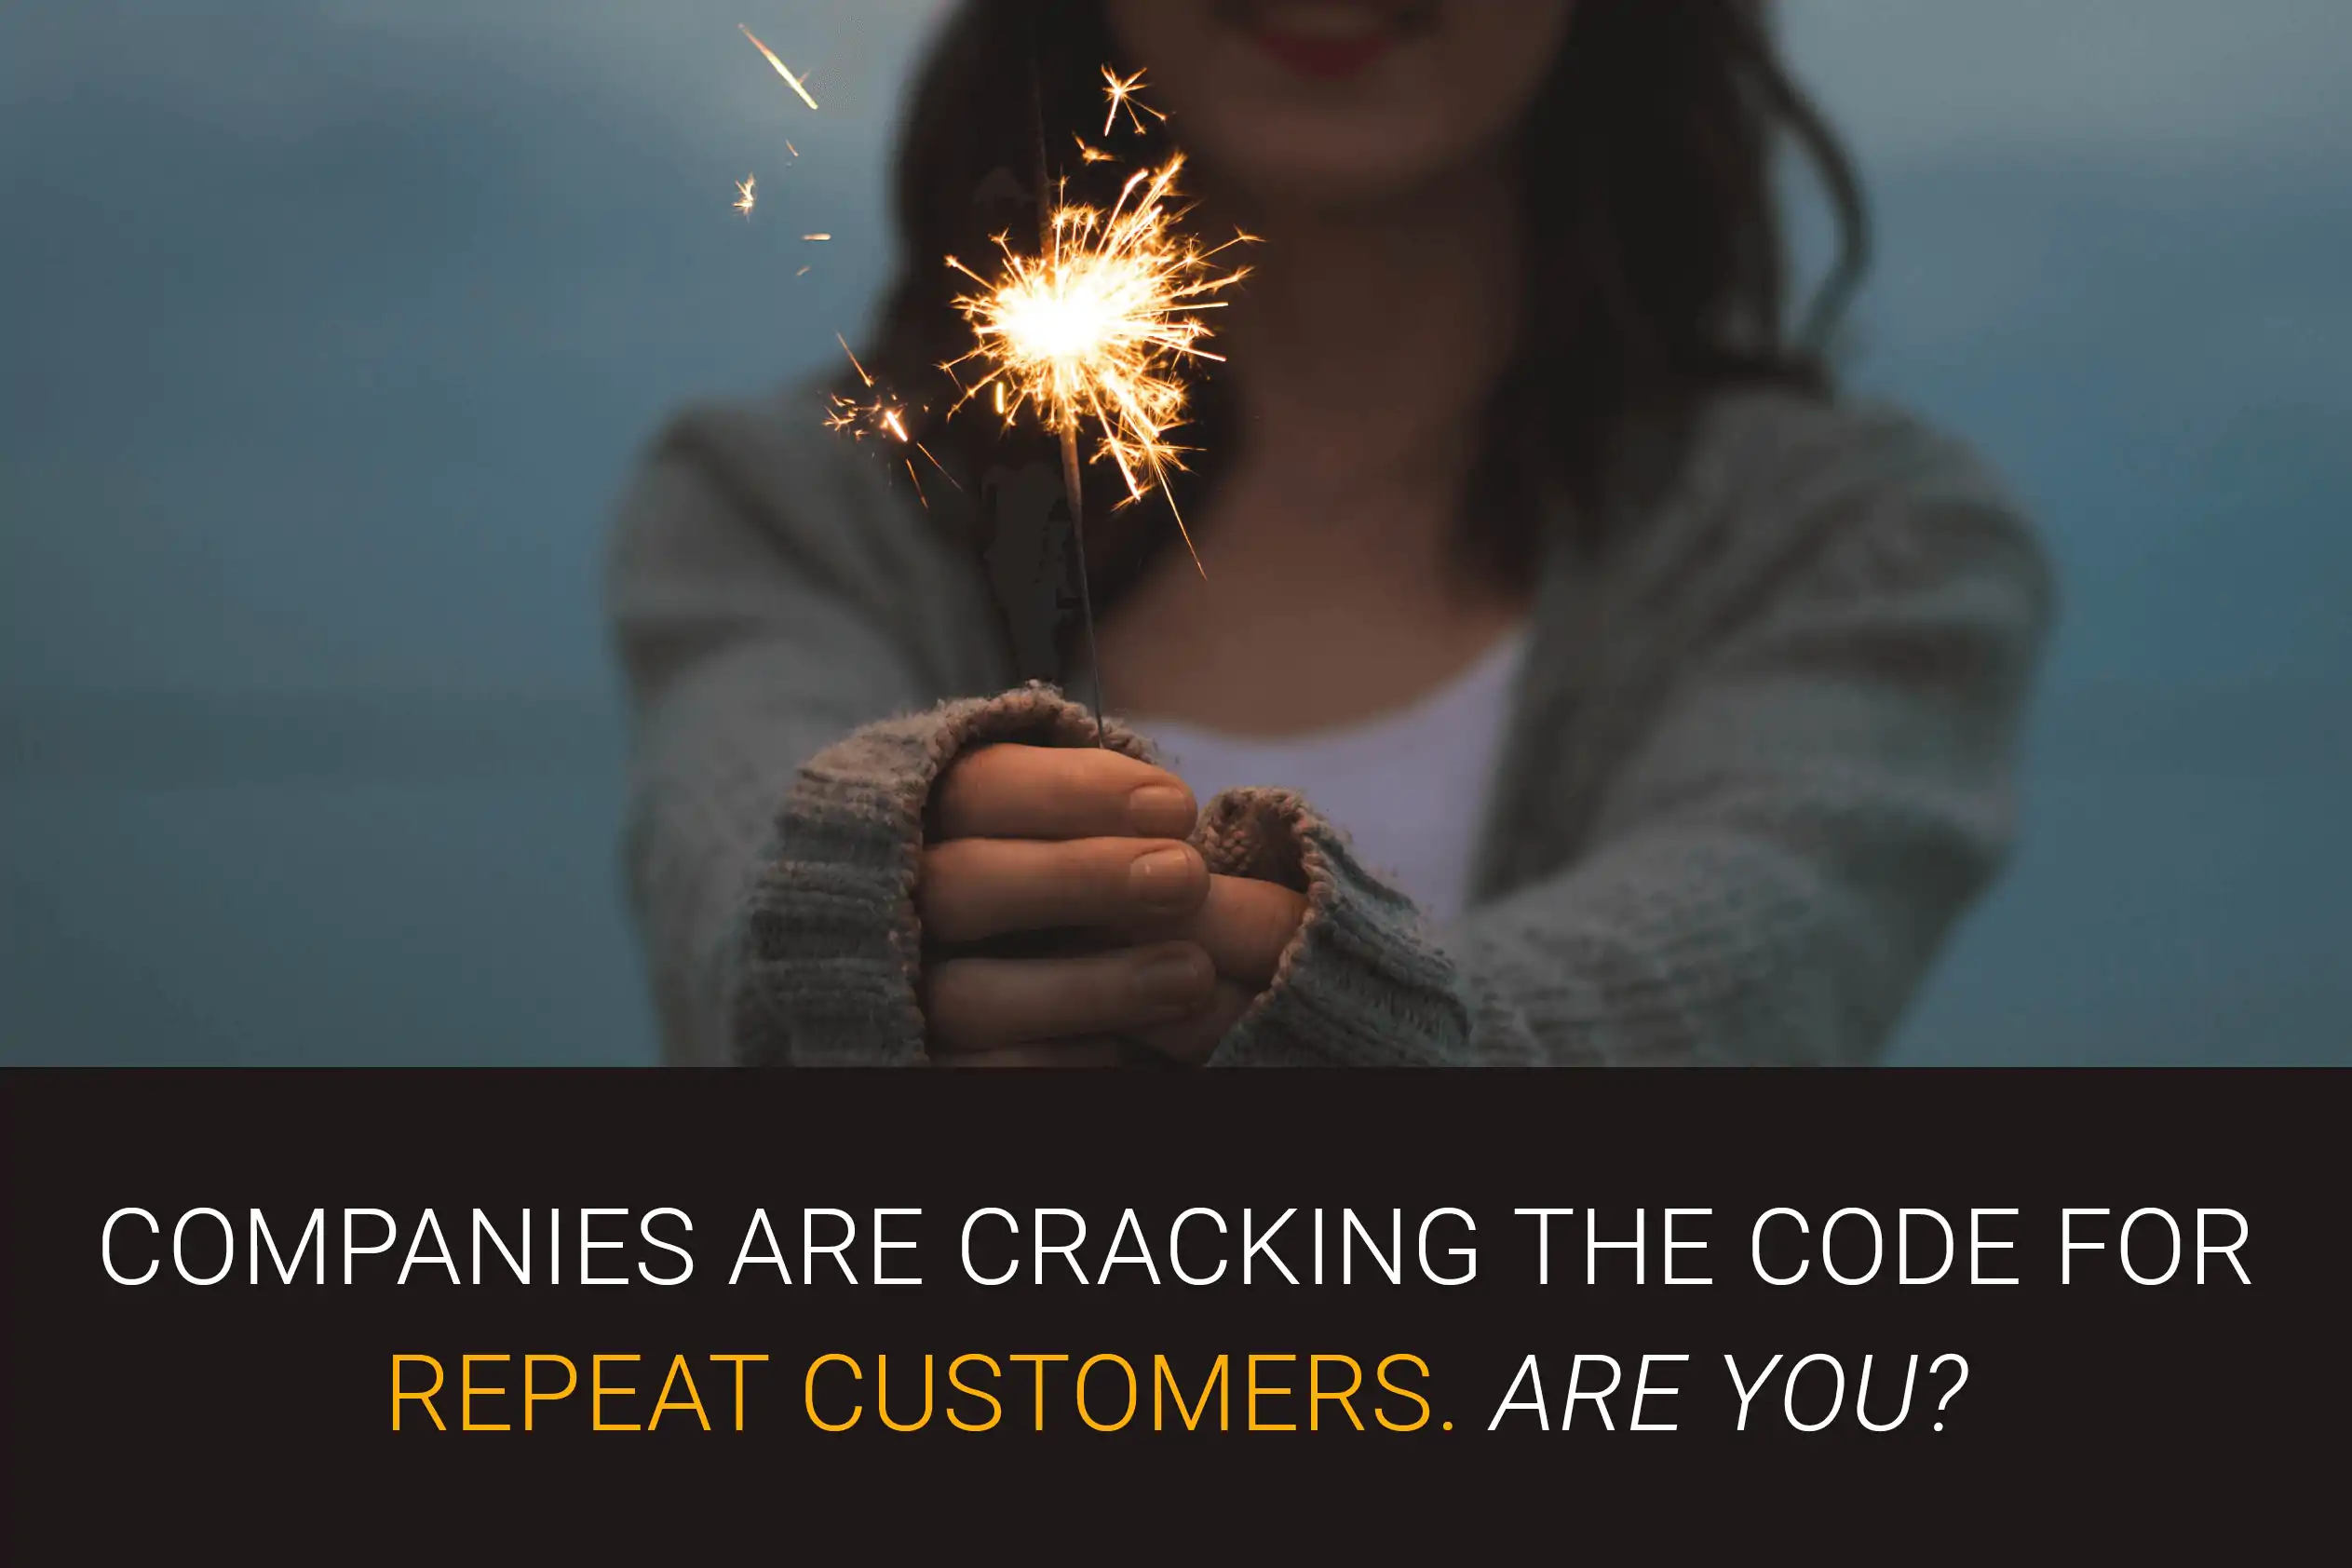 Companies are cracking the code for repeat customers. Are you?